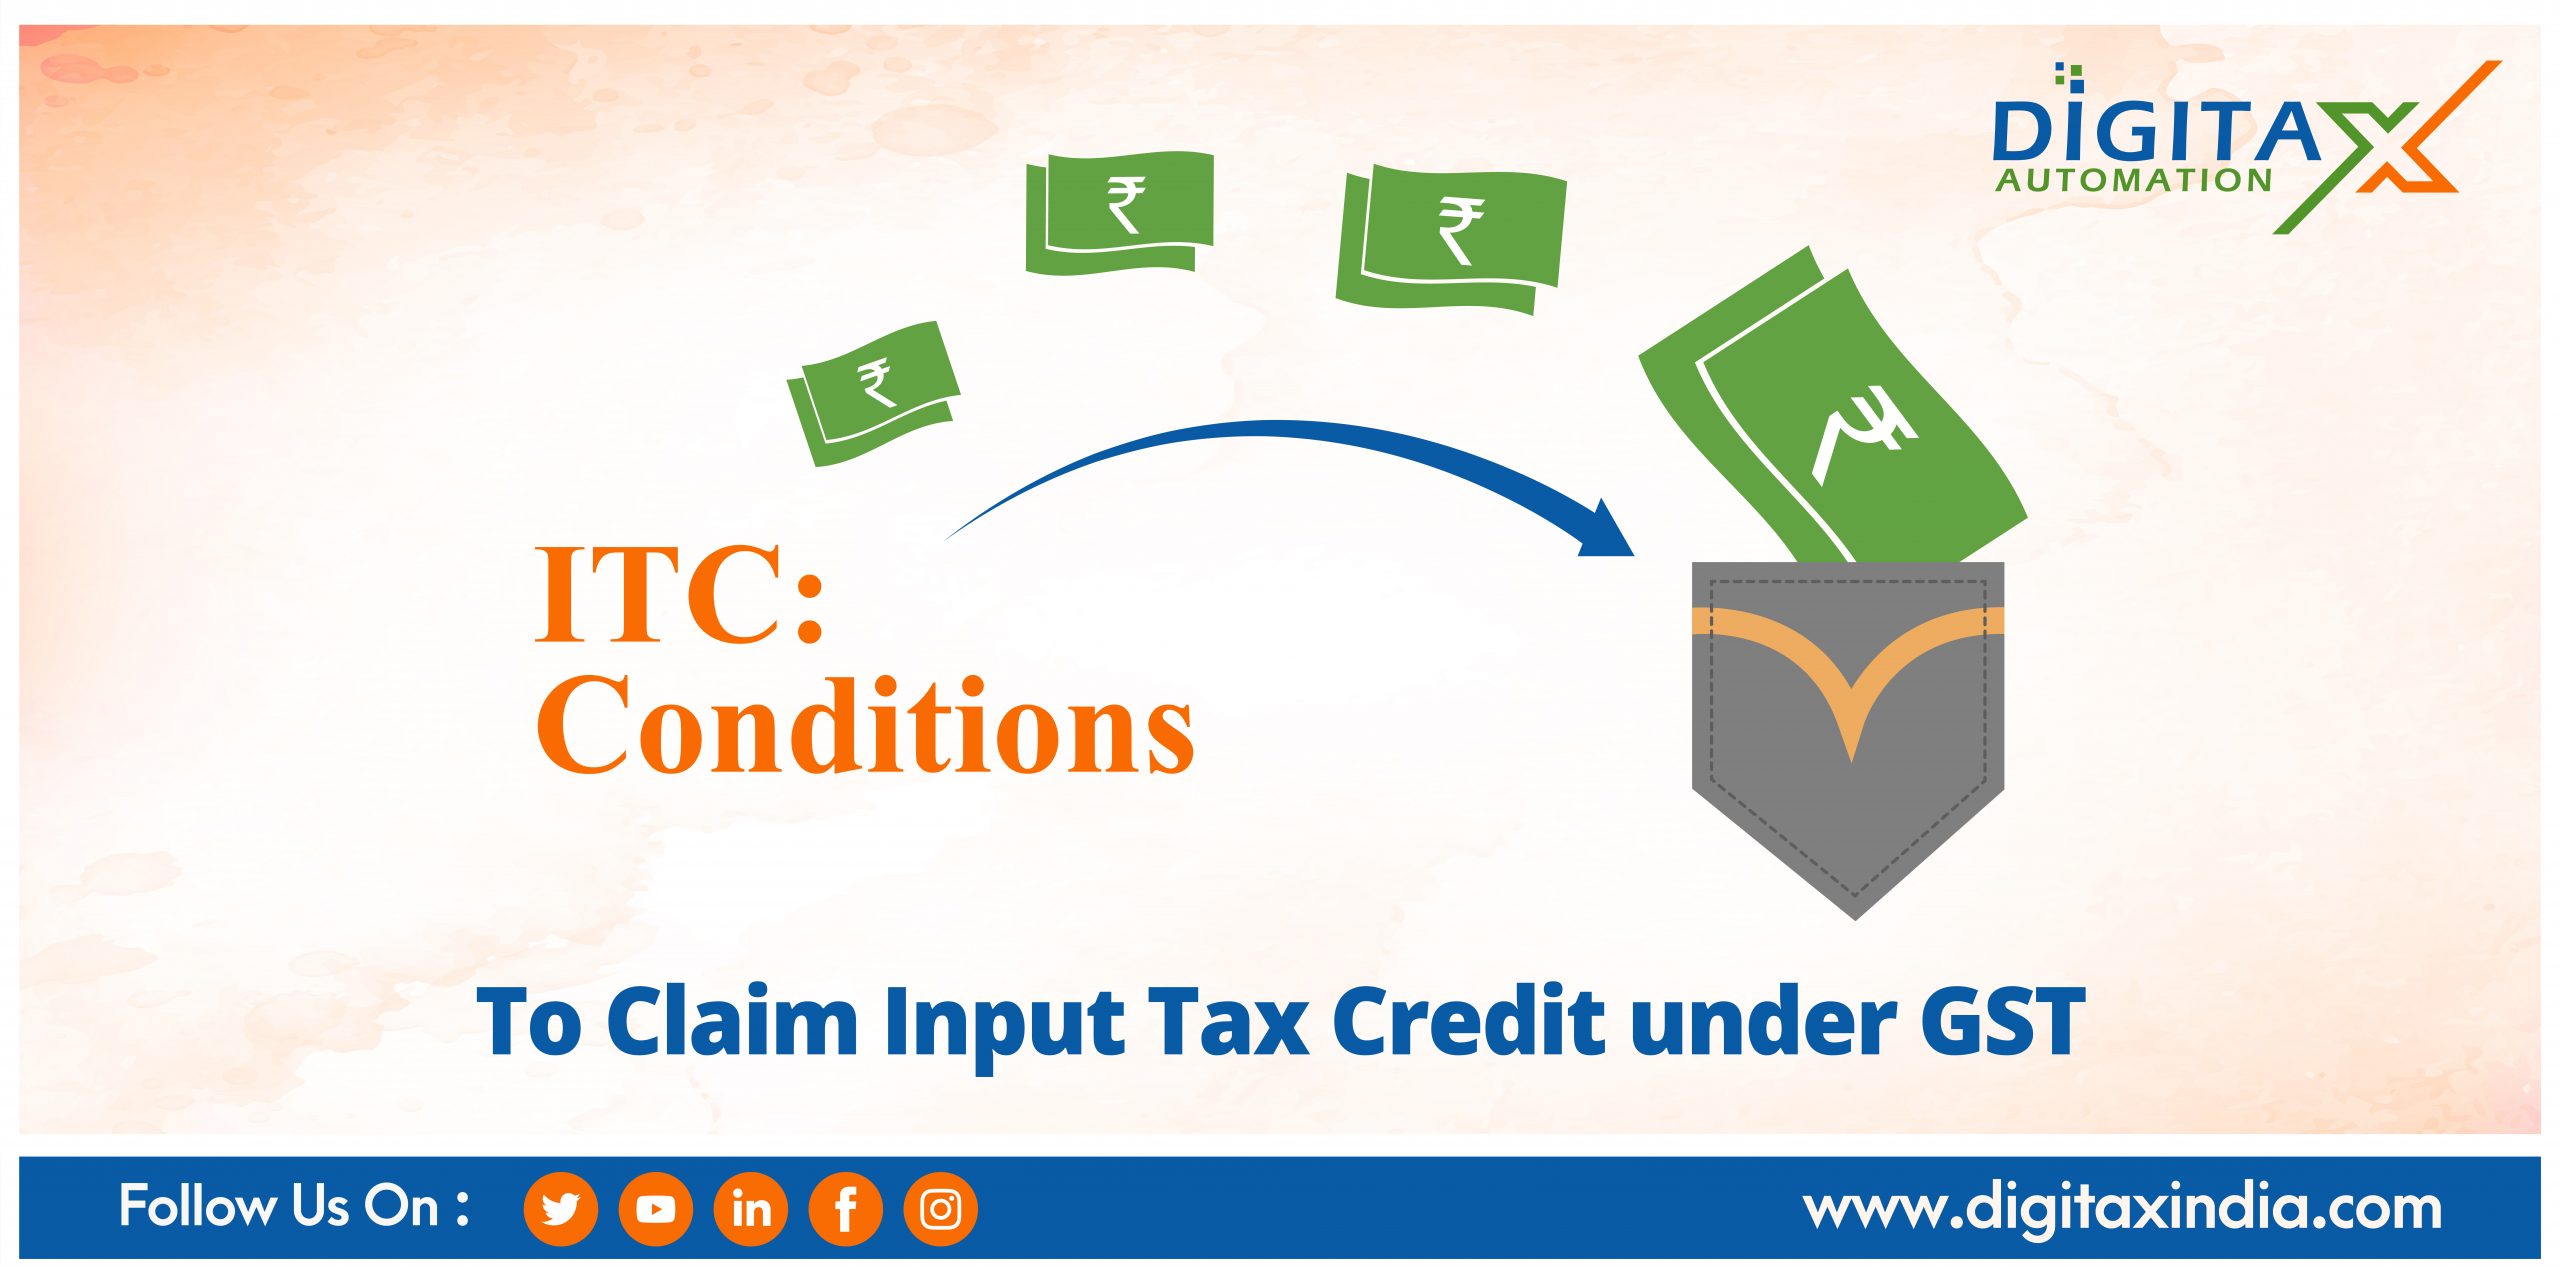 ITC: Conditions To Claim Input Tax Credit under GST